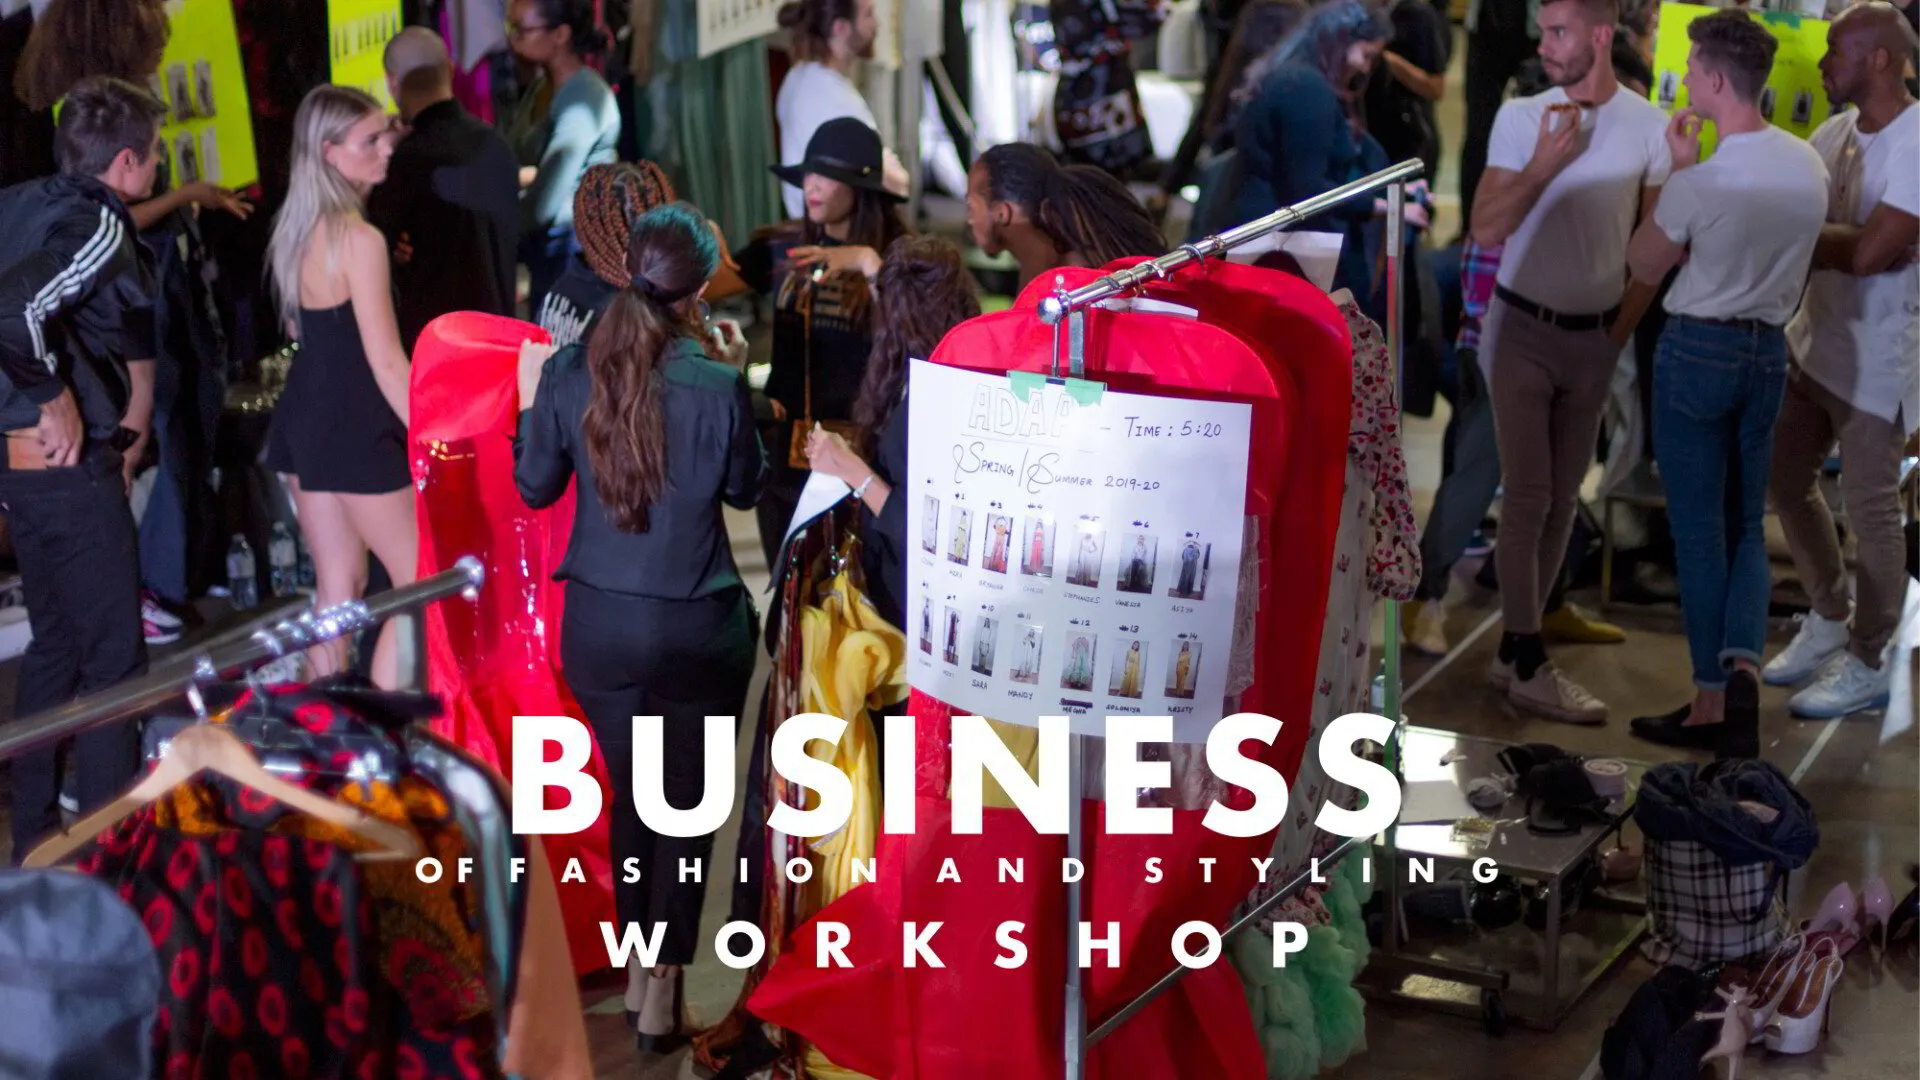 Business of Fashion & Styling Workshop